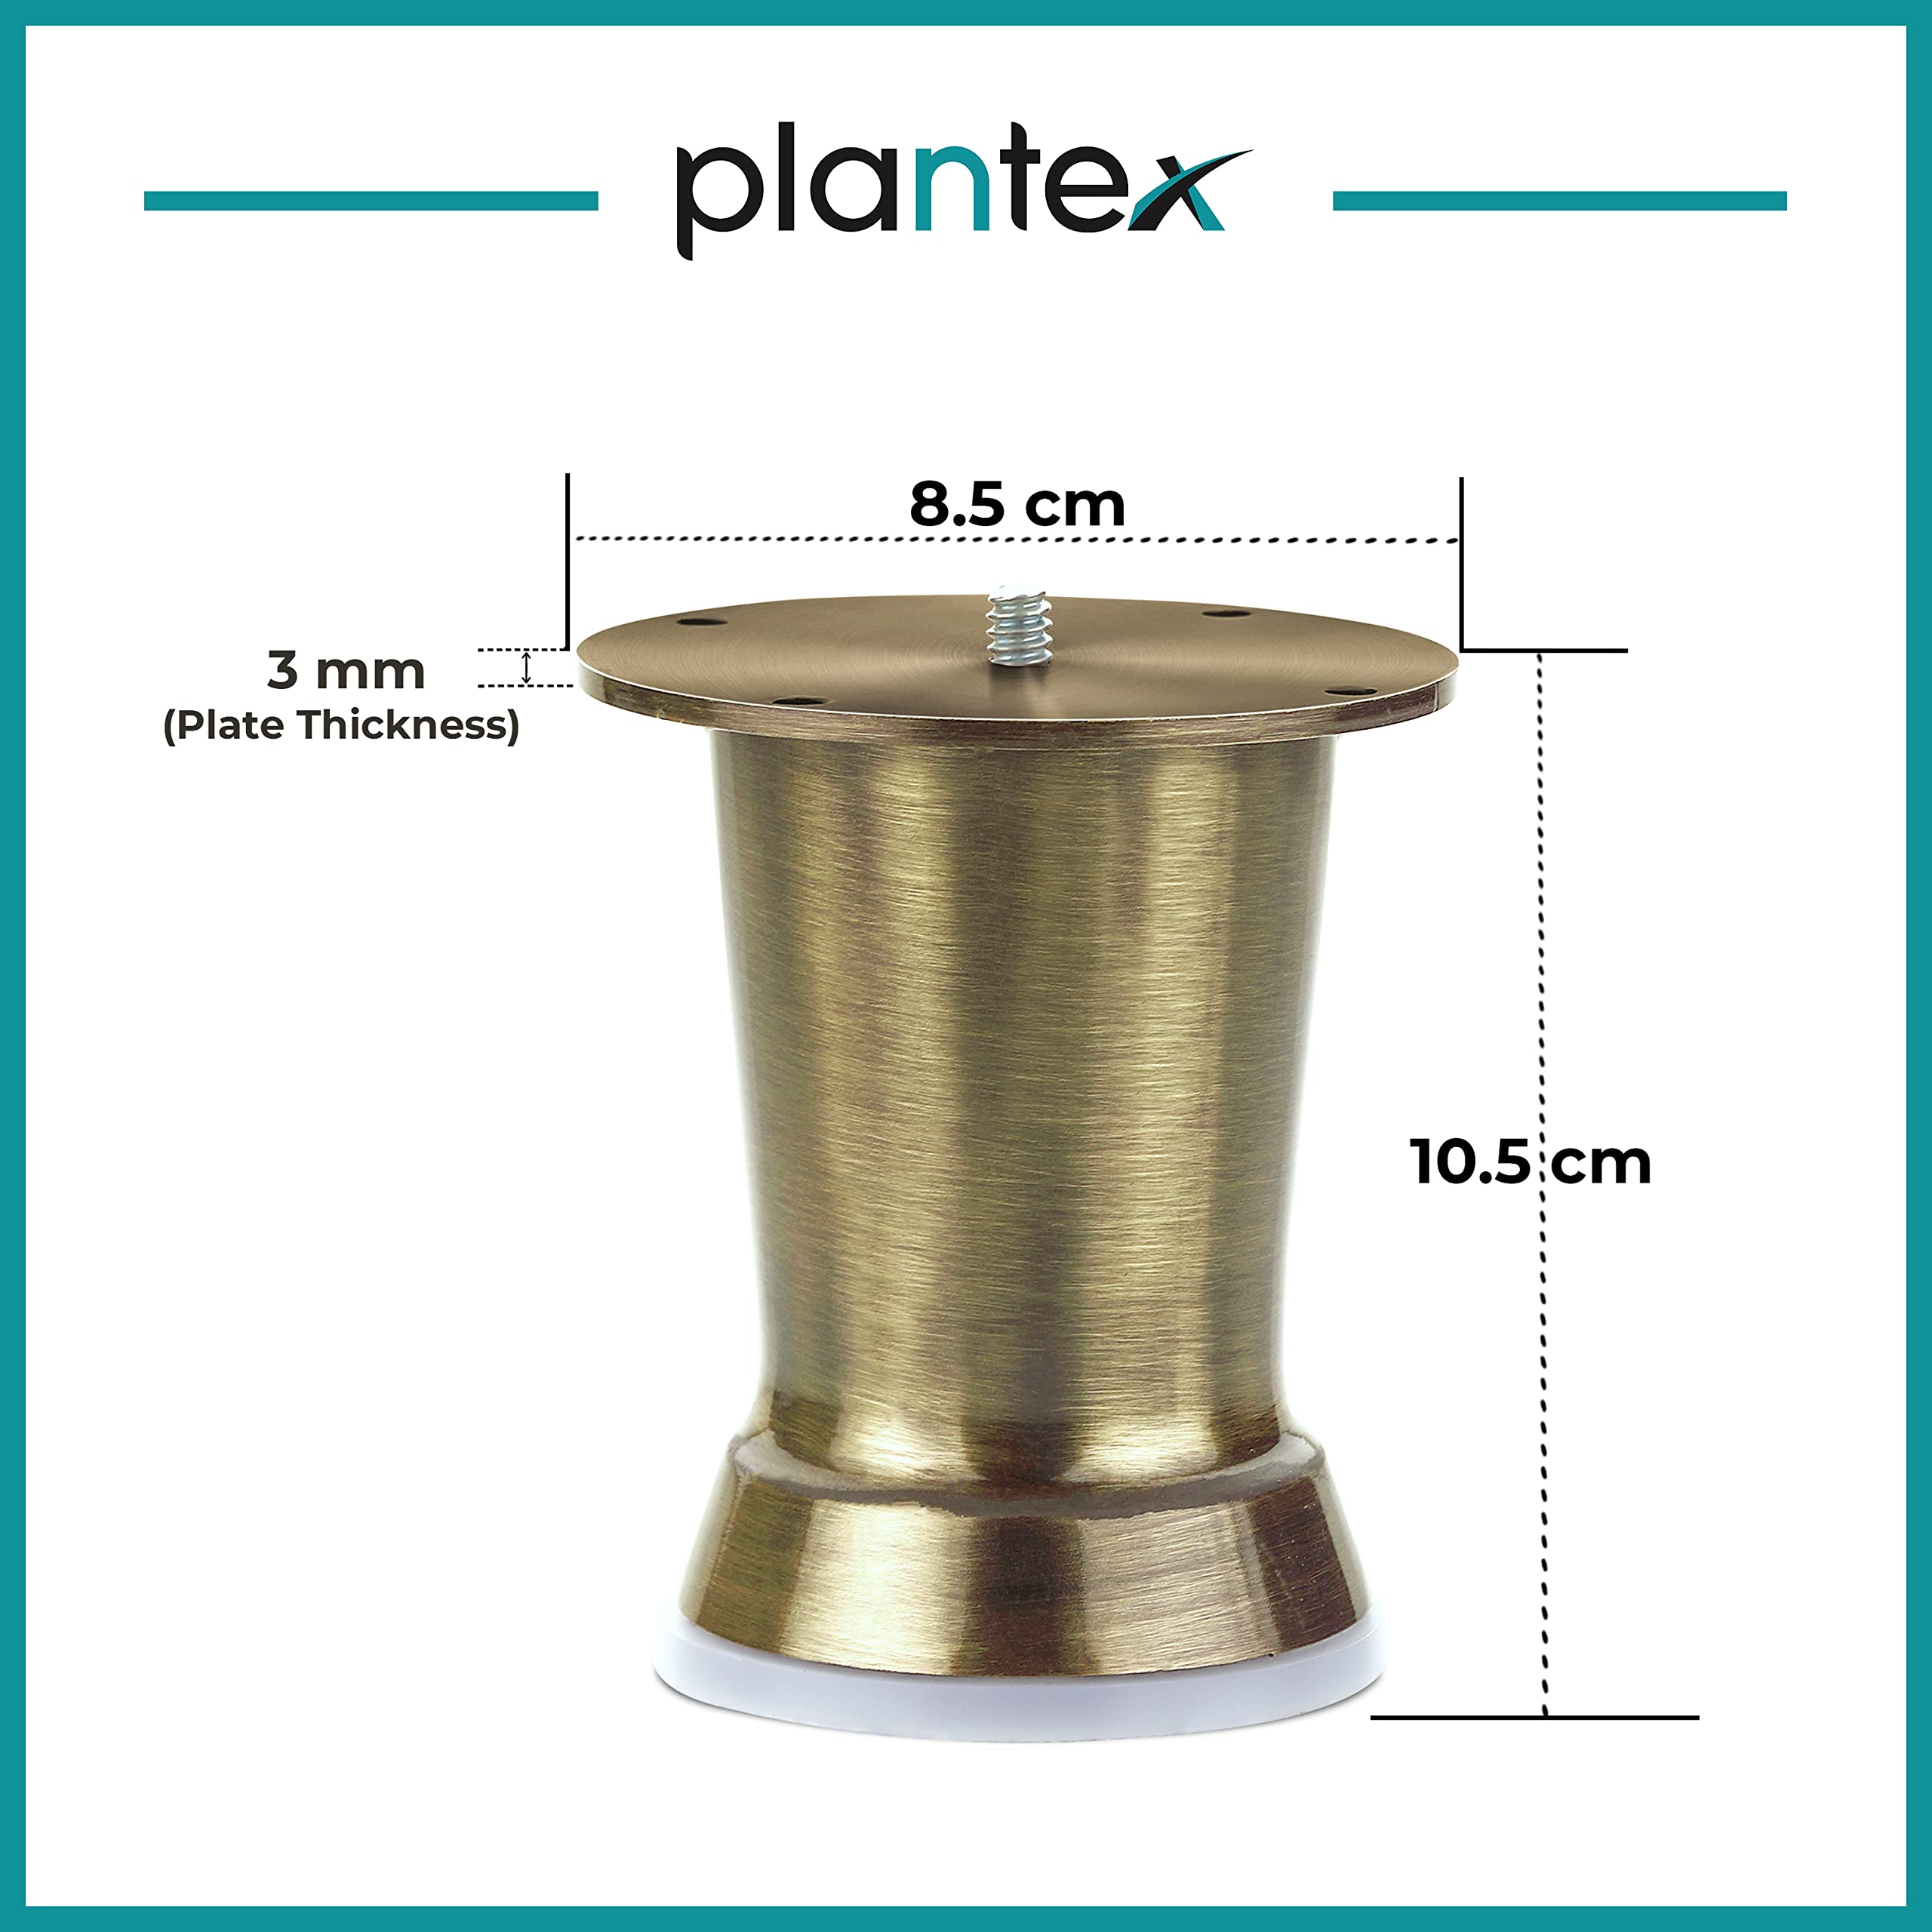 Plantex Heavy Duty Stainless Steel 4 inch Sofa Leg/Bed Furniture Leg Pair for Home Furnitures (DTS-51, Brass Antique) – Pcs - 10